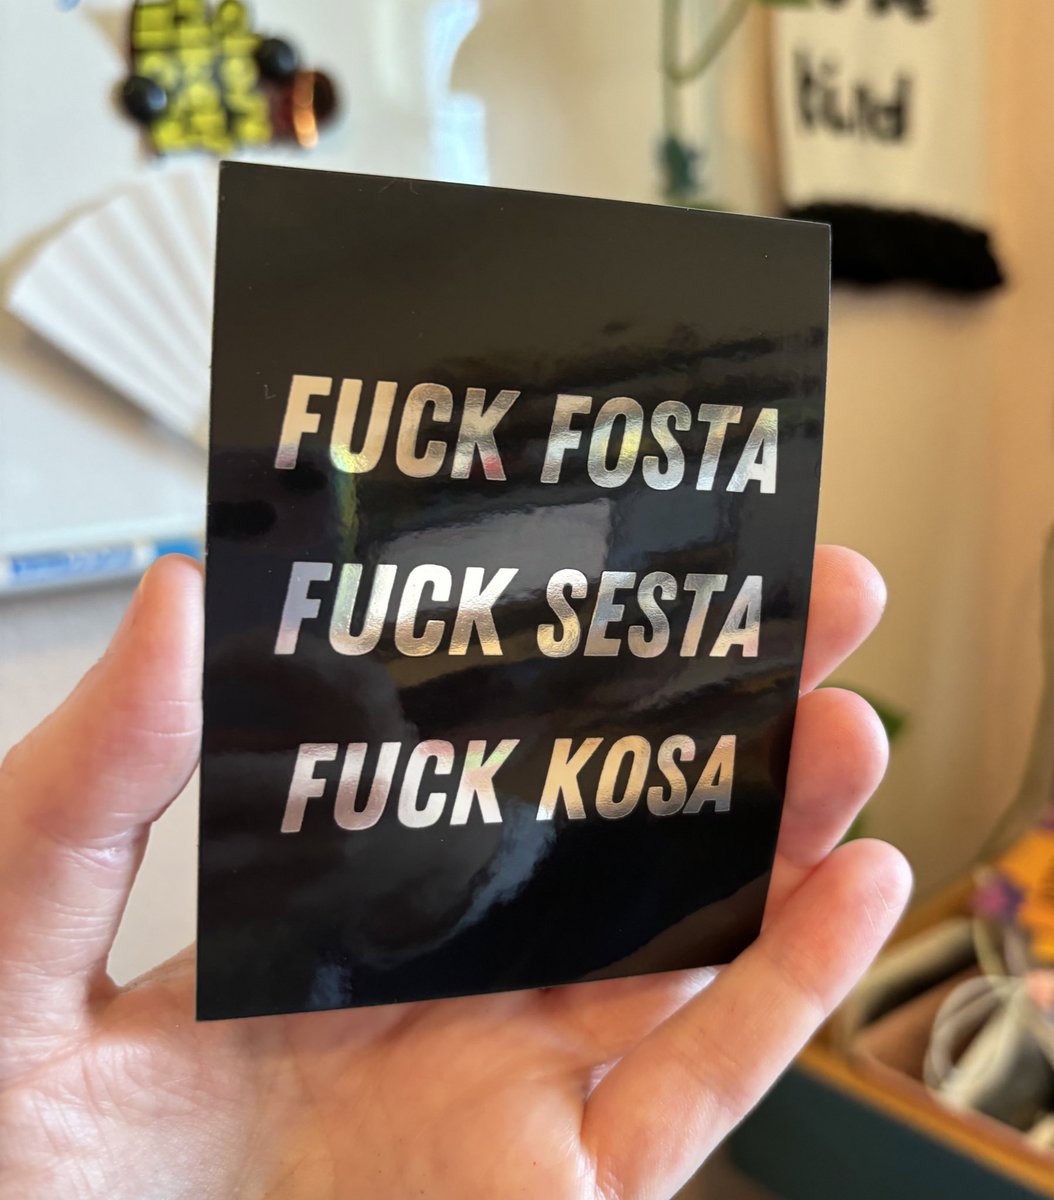 New chrome lettering sticker just dropped 👇 Support sex workers, fu*k all three of these. Driving sex work further underground makes it less safe, it doesn’t help anyone.